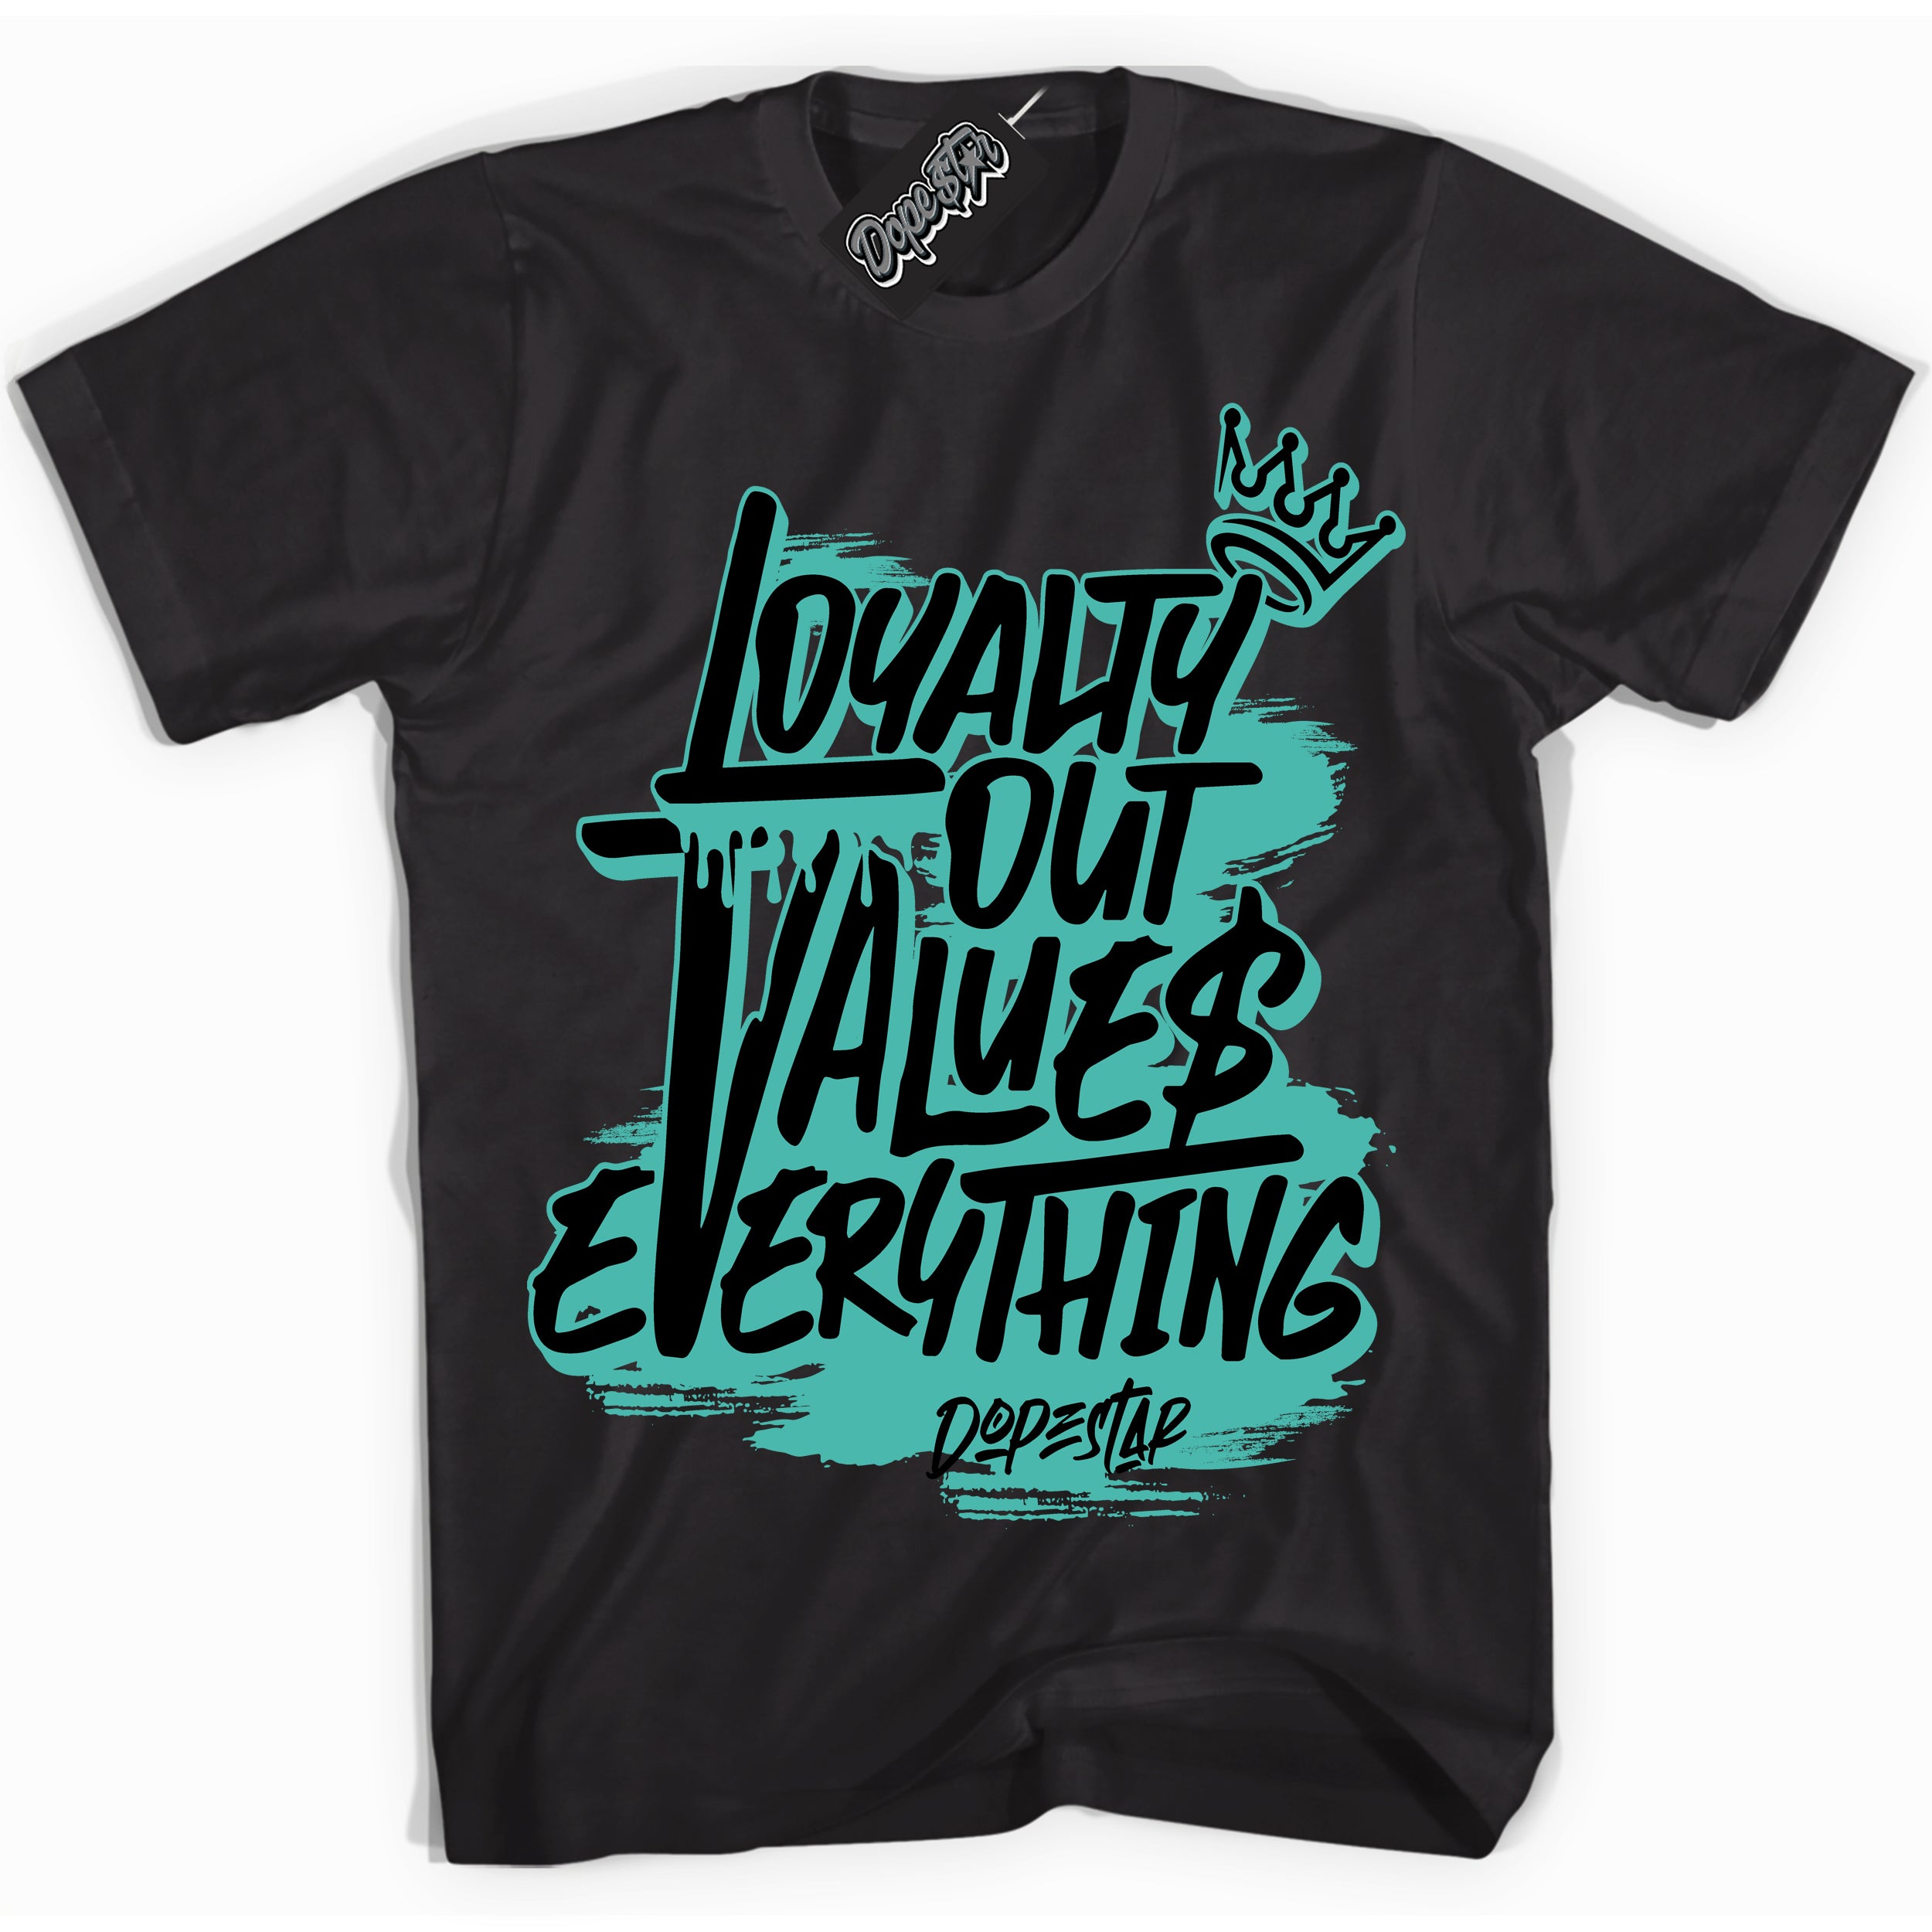 Cool Black Shirt with “ Loyalty Out Values Everything” design that perfectly matches Tiffany & Co. 1837 1s Sneakers.